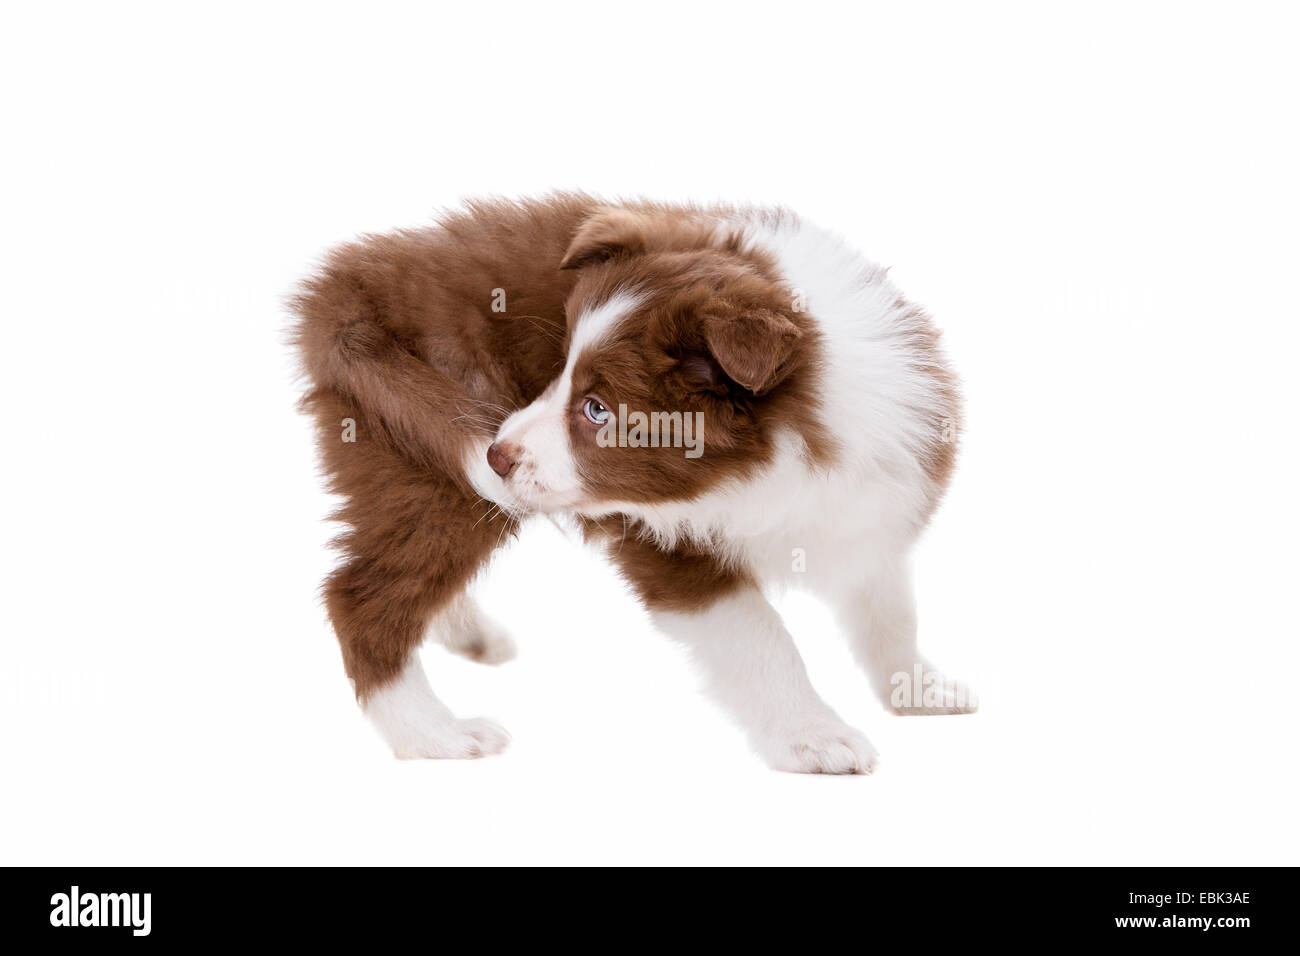 Border Collie puppy dog in front of a white background biting its own tail Stock Photo